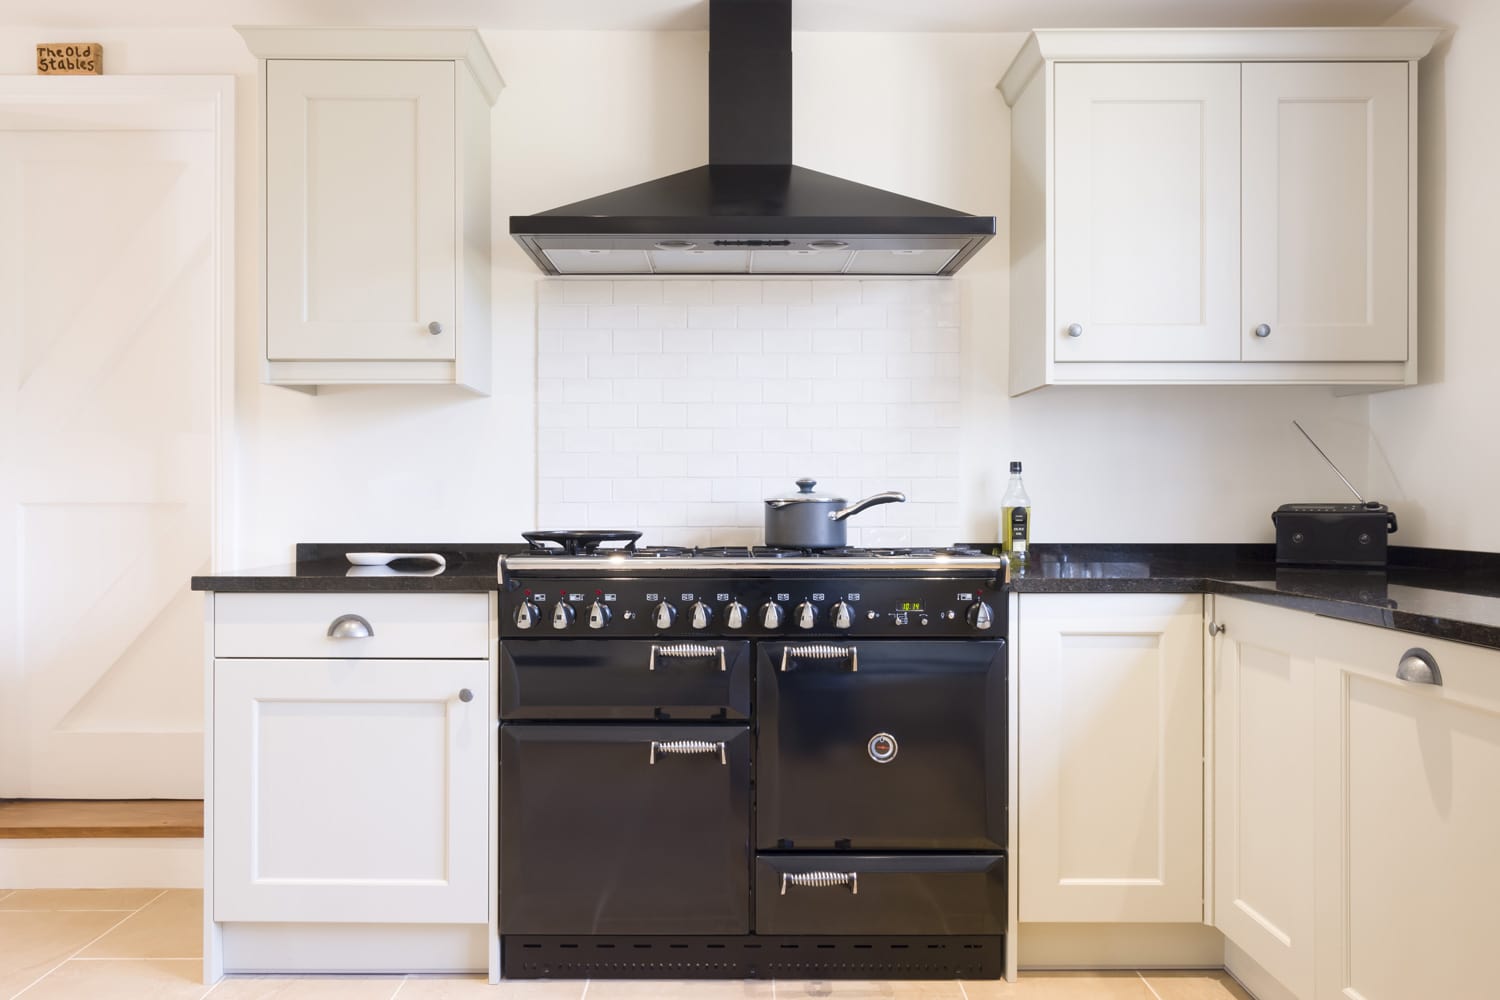 Modern modular kitchen interior in black and off white, with range cooker and chimney extractor hood.